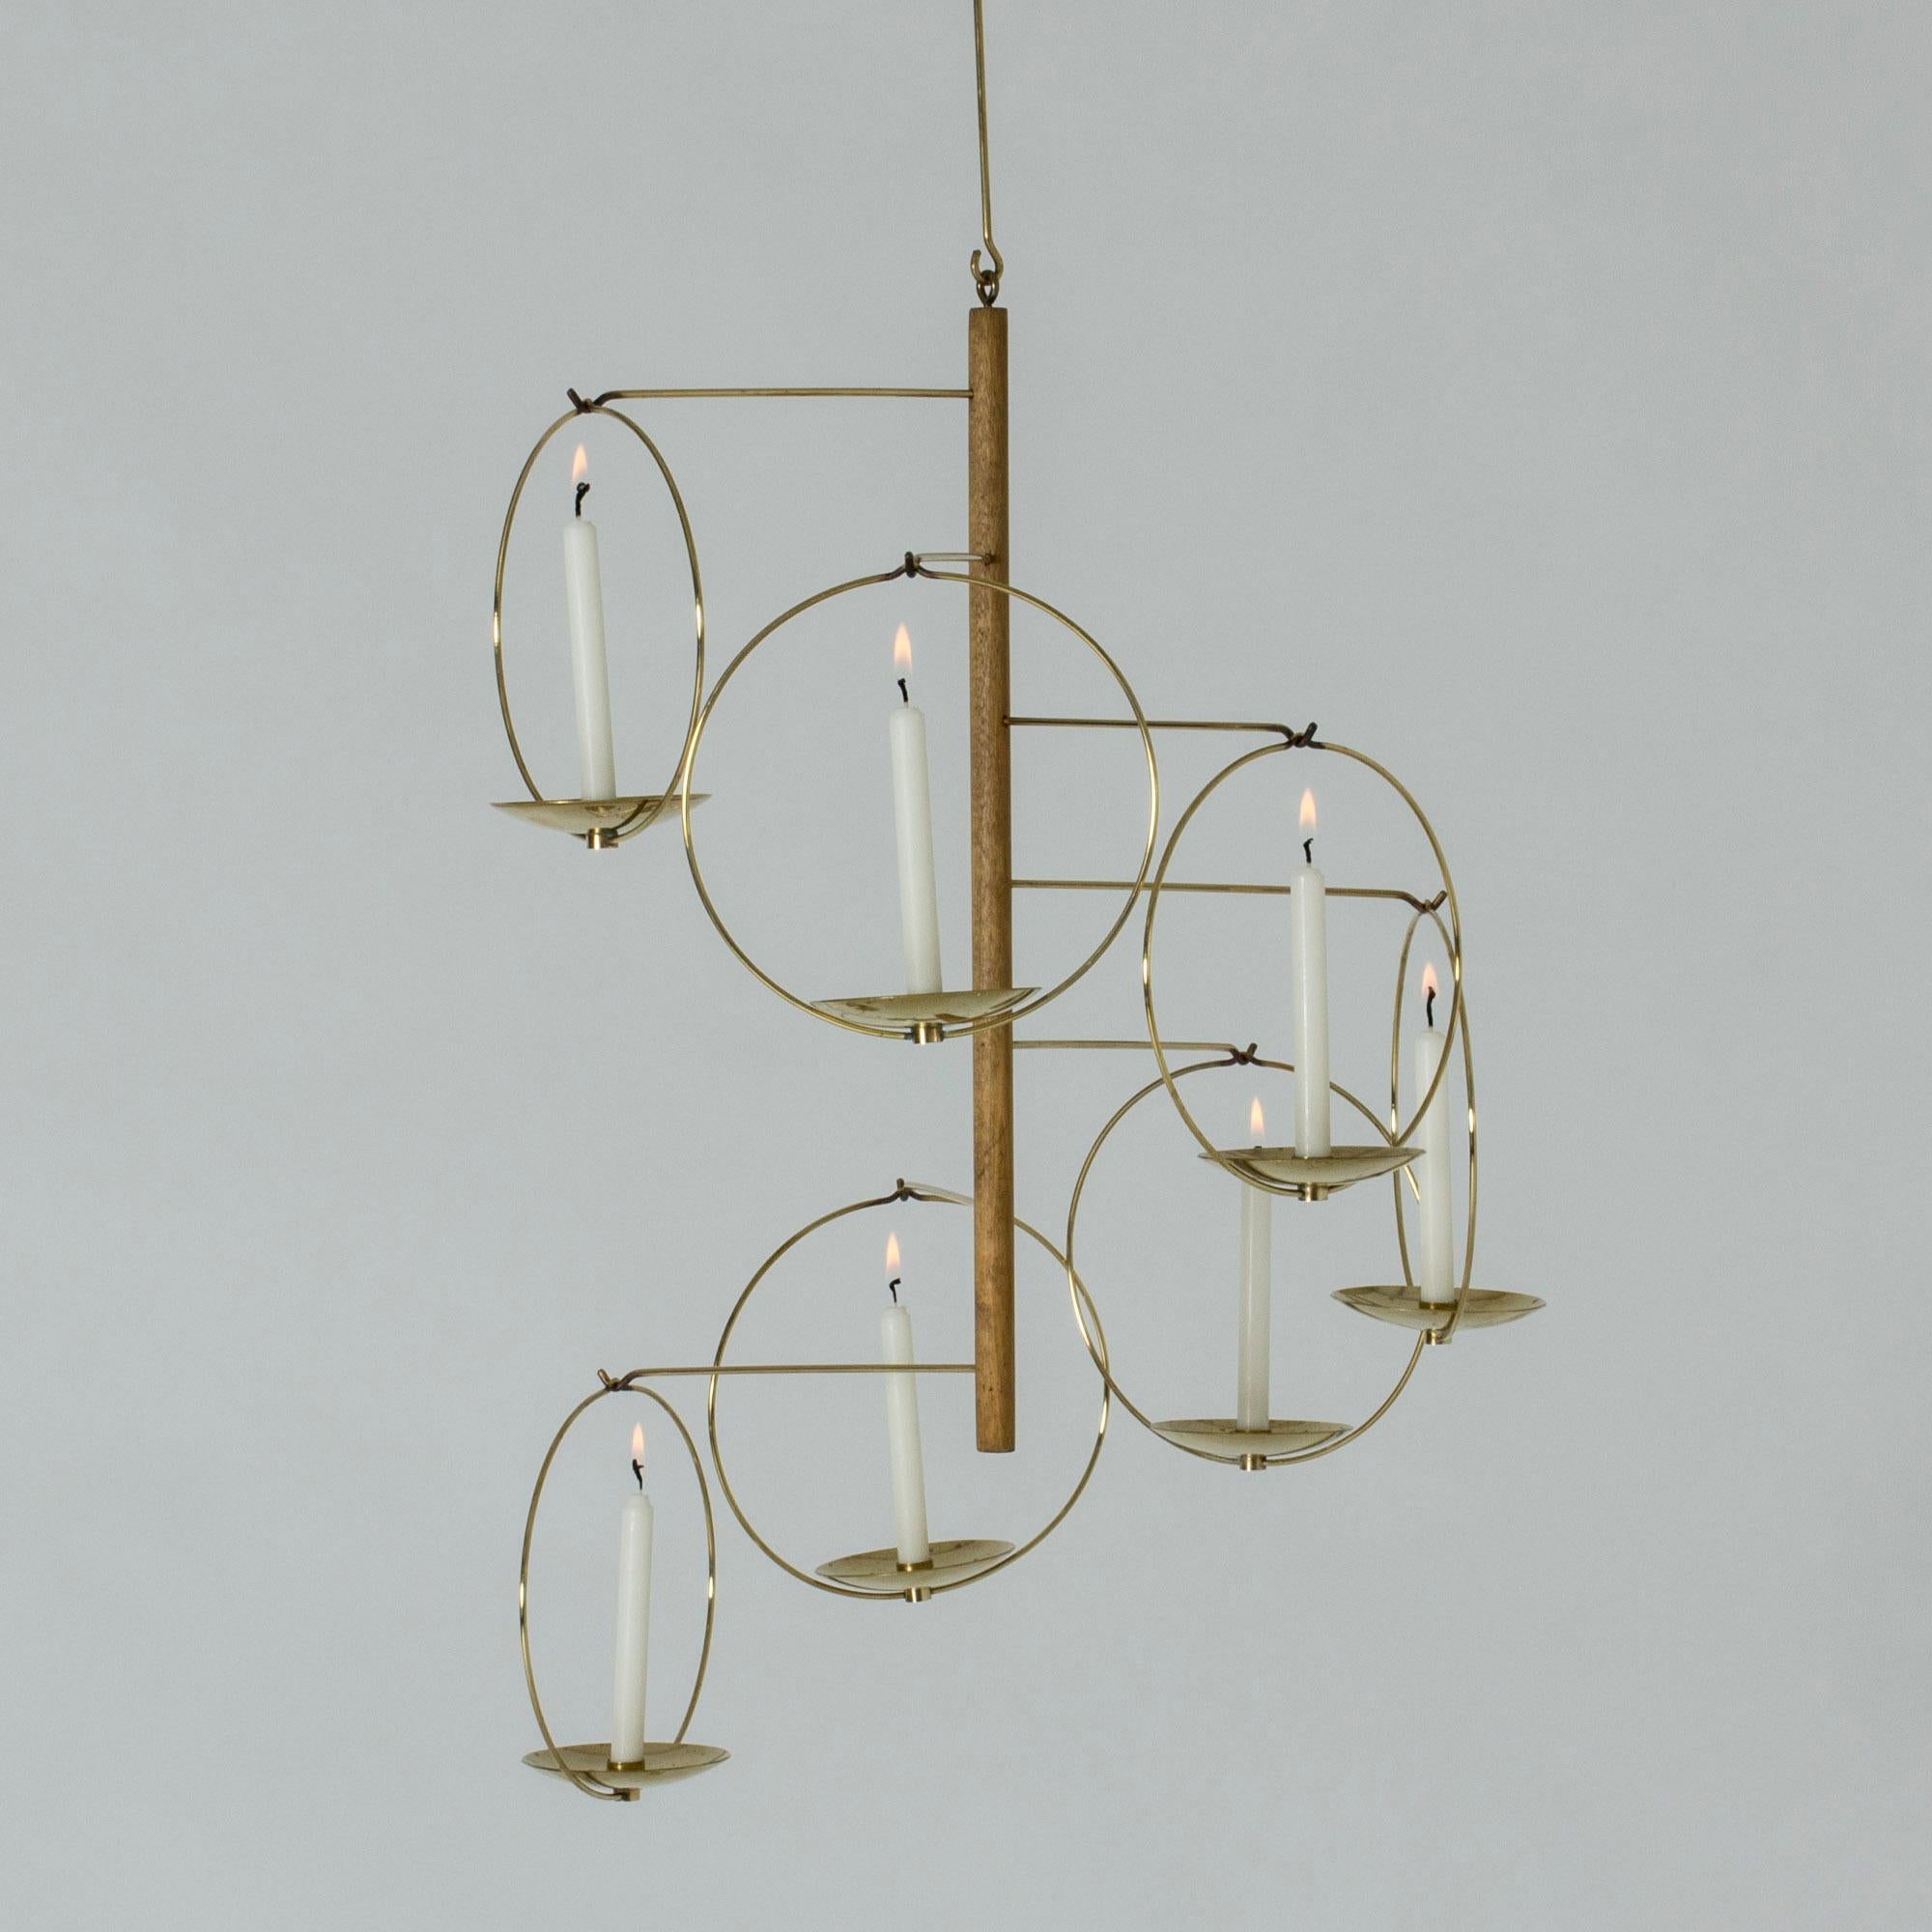 Beautiful, light and graphic candle chandelier from Aarikka. In the middle is a teak pole from which brass slender brass arms are extended, each holding a candleholder. Fits thin candles.

The height is 98 cm including the brass suspension pole,